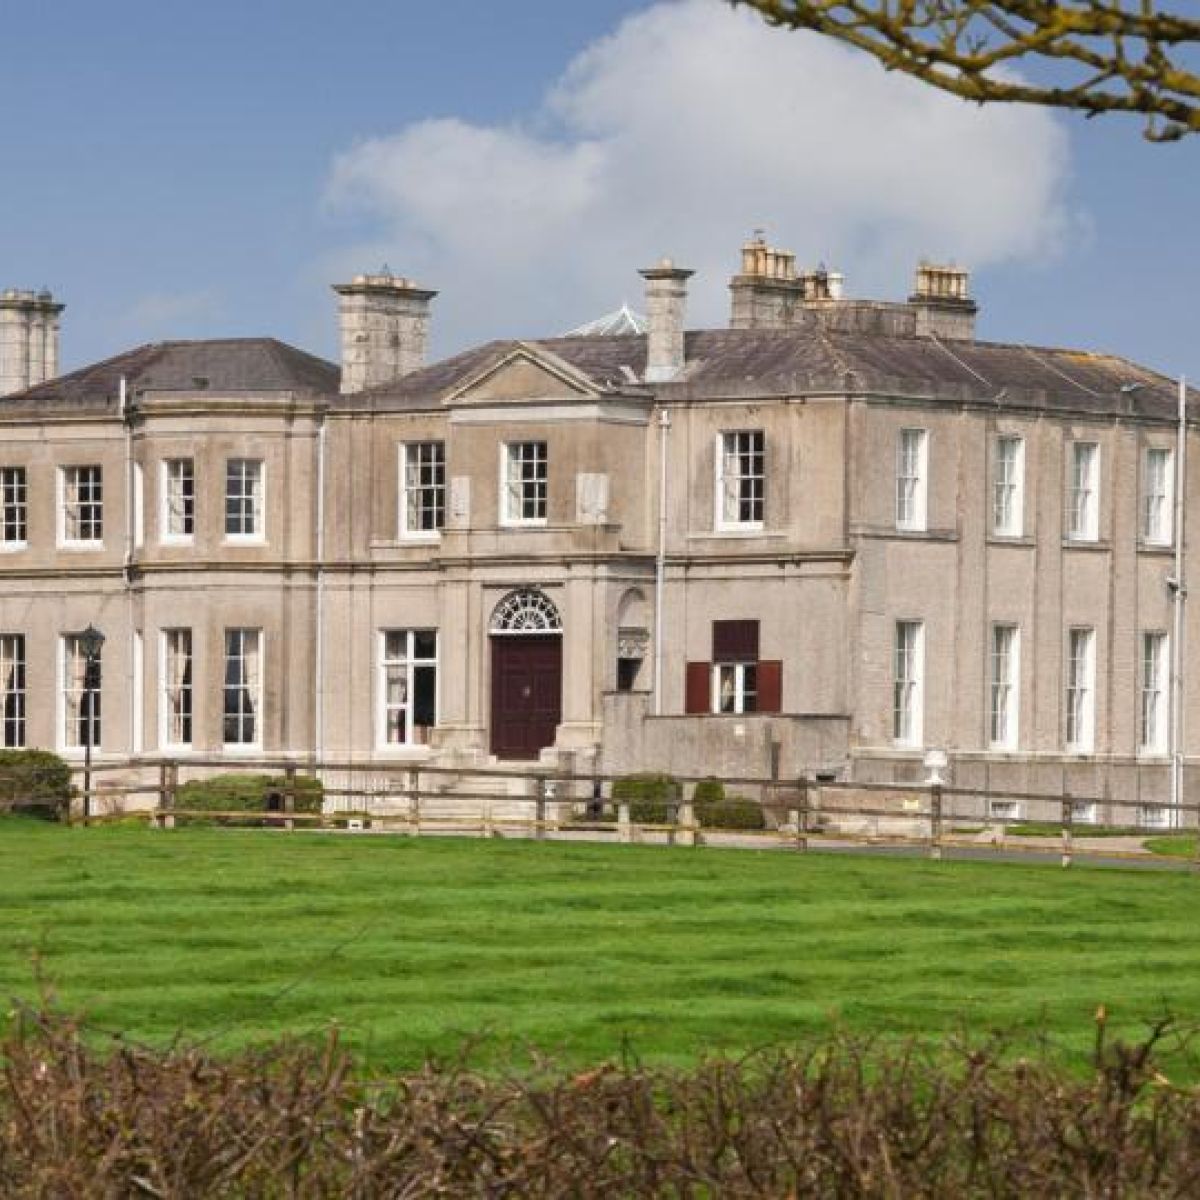 Rent Kilcock, Kildare Lettings, Apartments and Houses for 